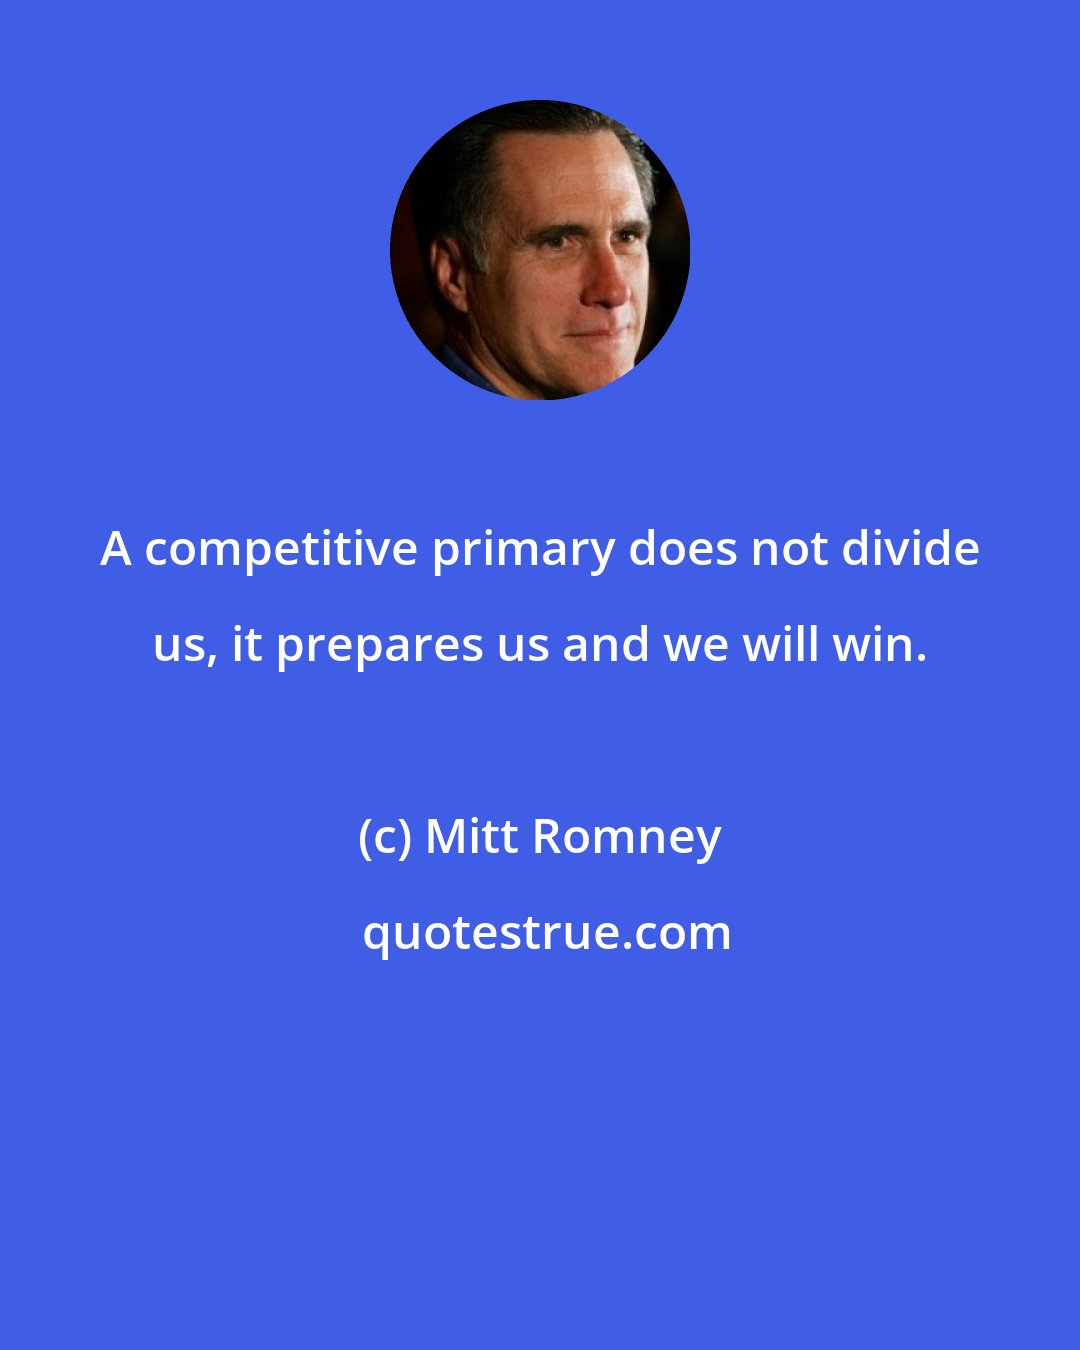 Mitt Romney: A competitive primary does not divide us, it prepares us and we will win.